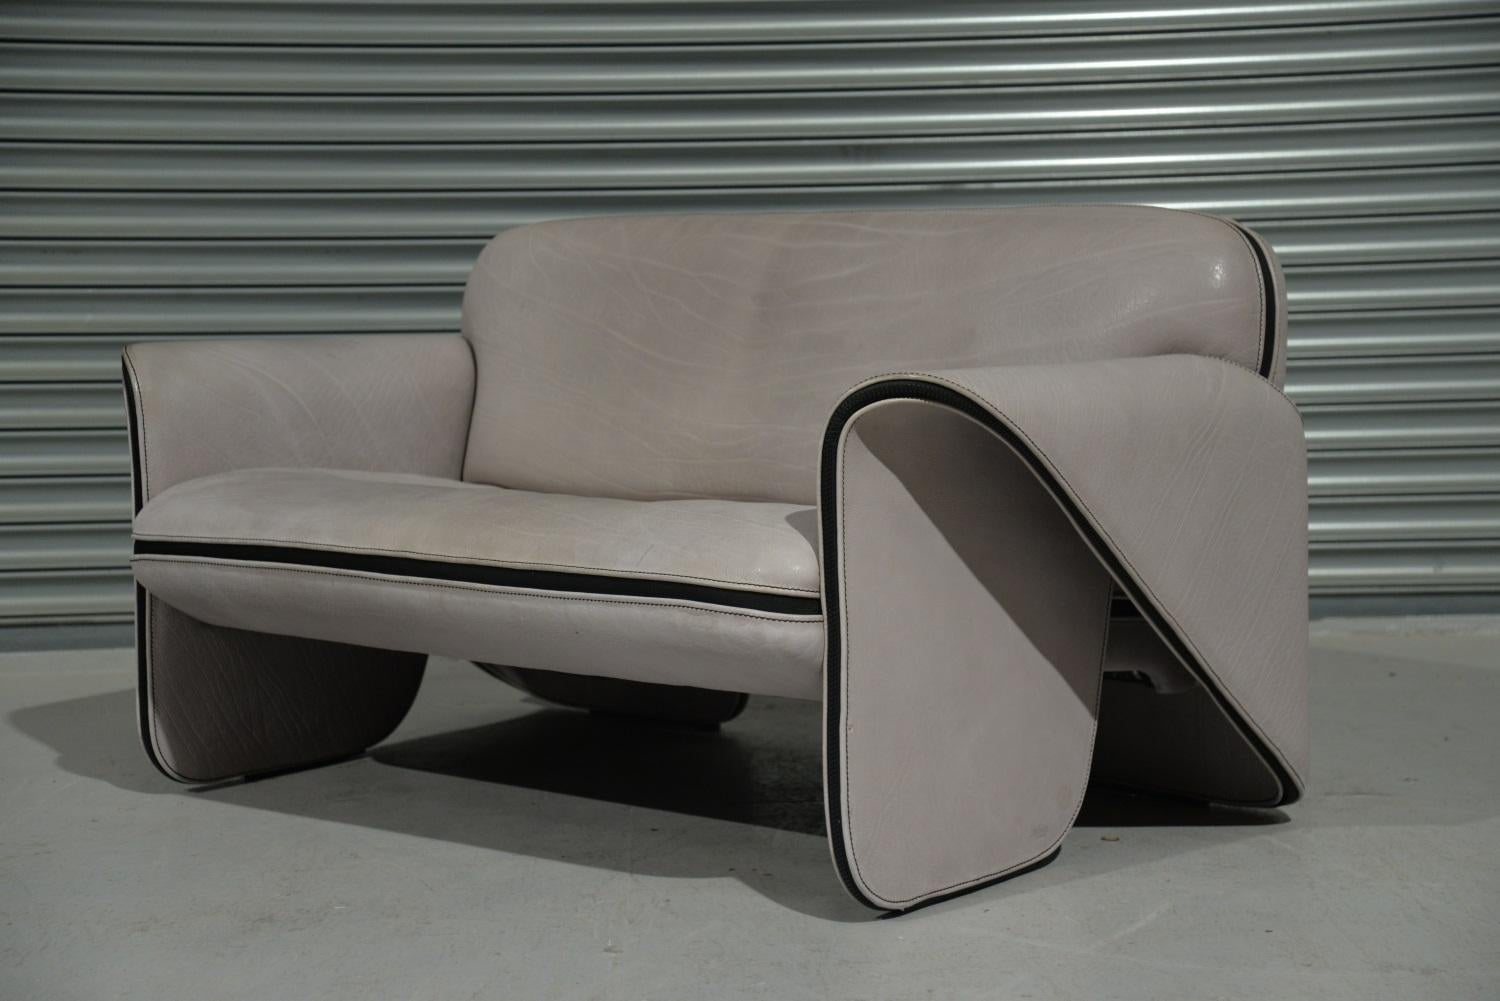 Discounted airfreight for our US and International customers (from 2 weeks door to door)

We are delighted to bring to you an ultra rare vintage De Sede DS 125 sofa by Gerd Lange in 1978. These sculptural hand built pieces are upholstered in